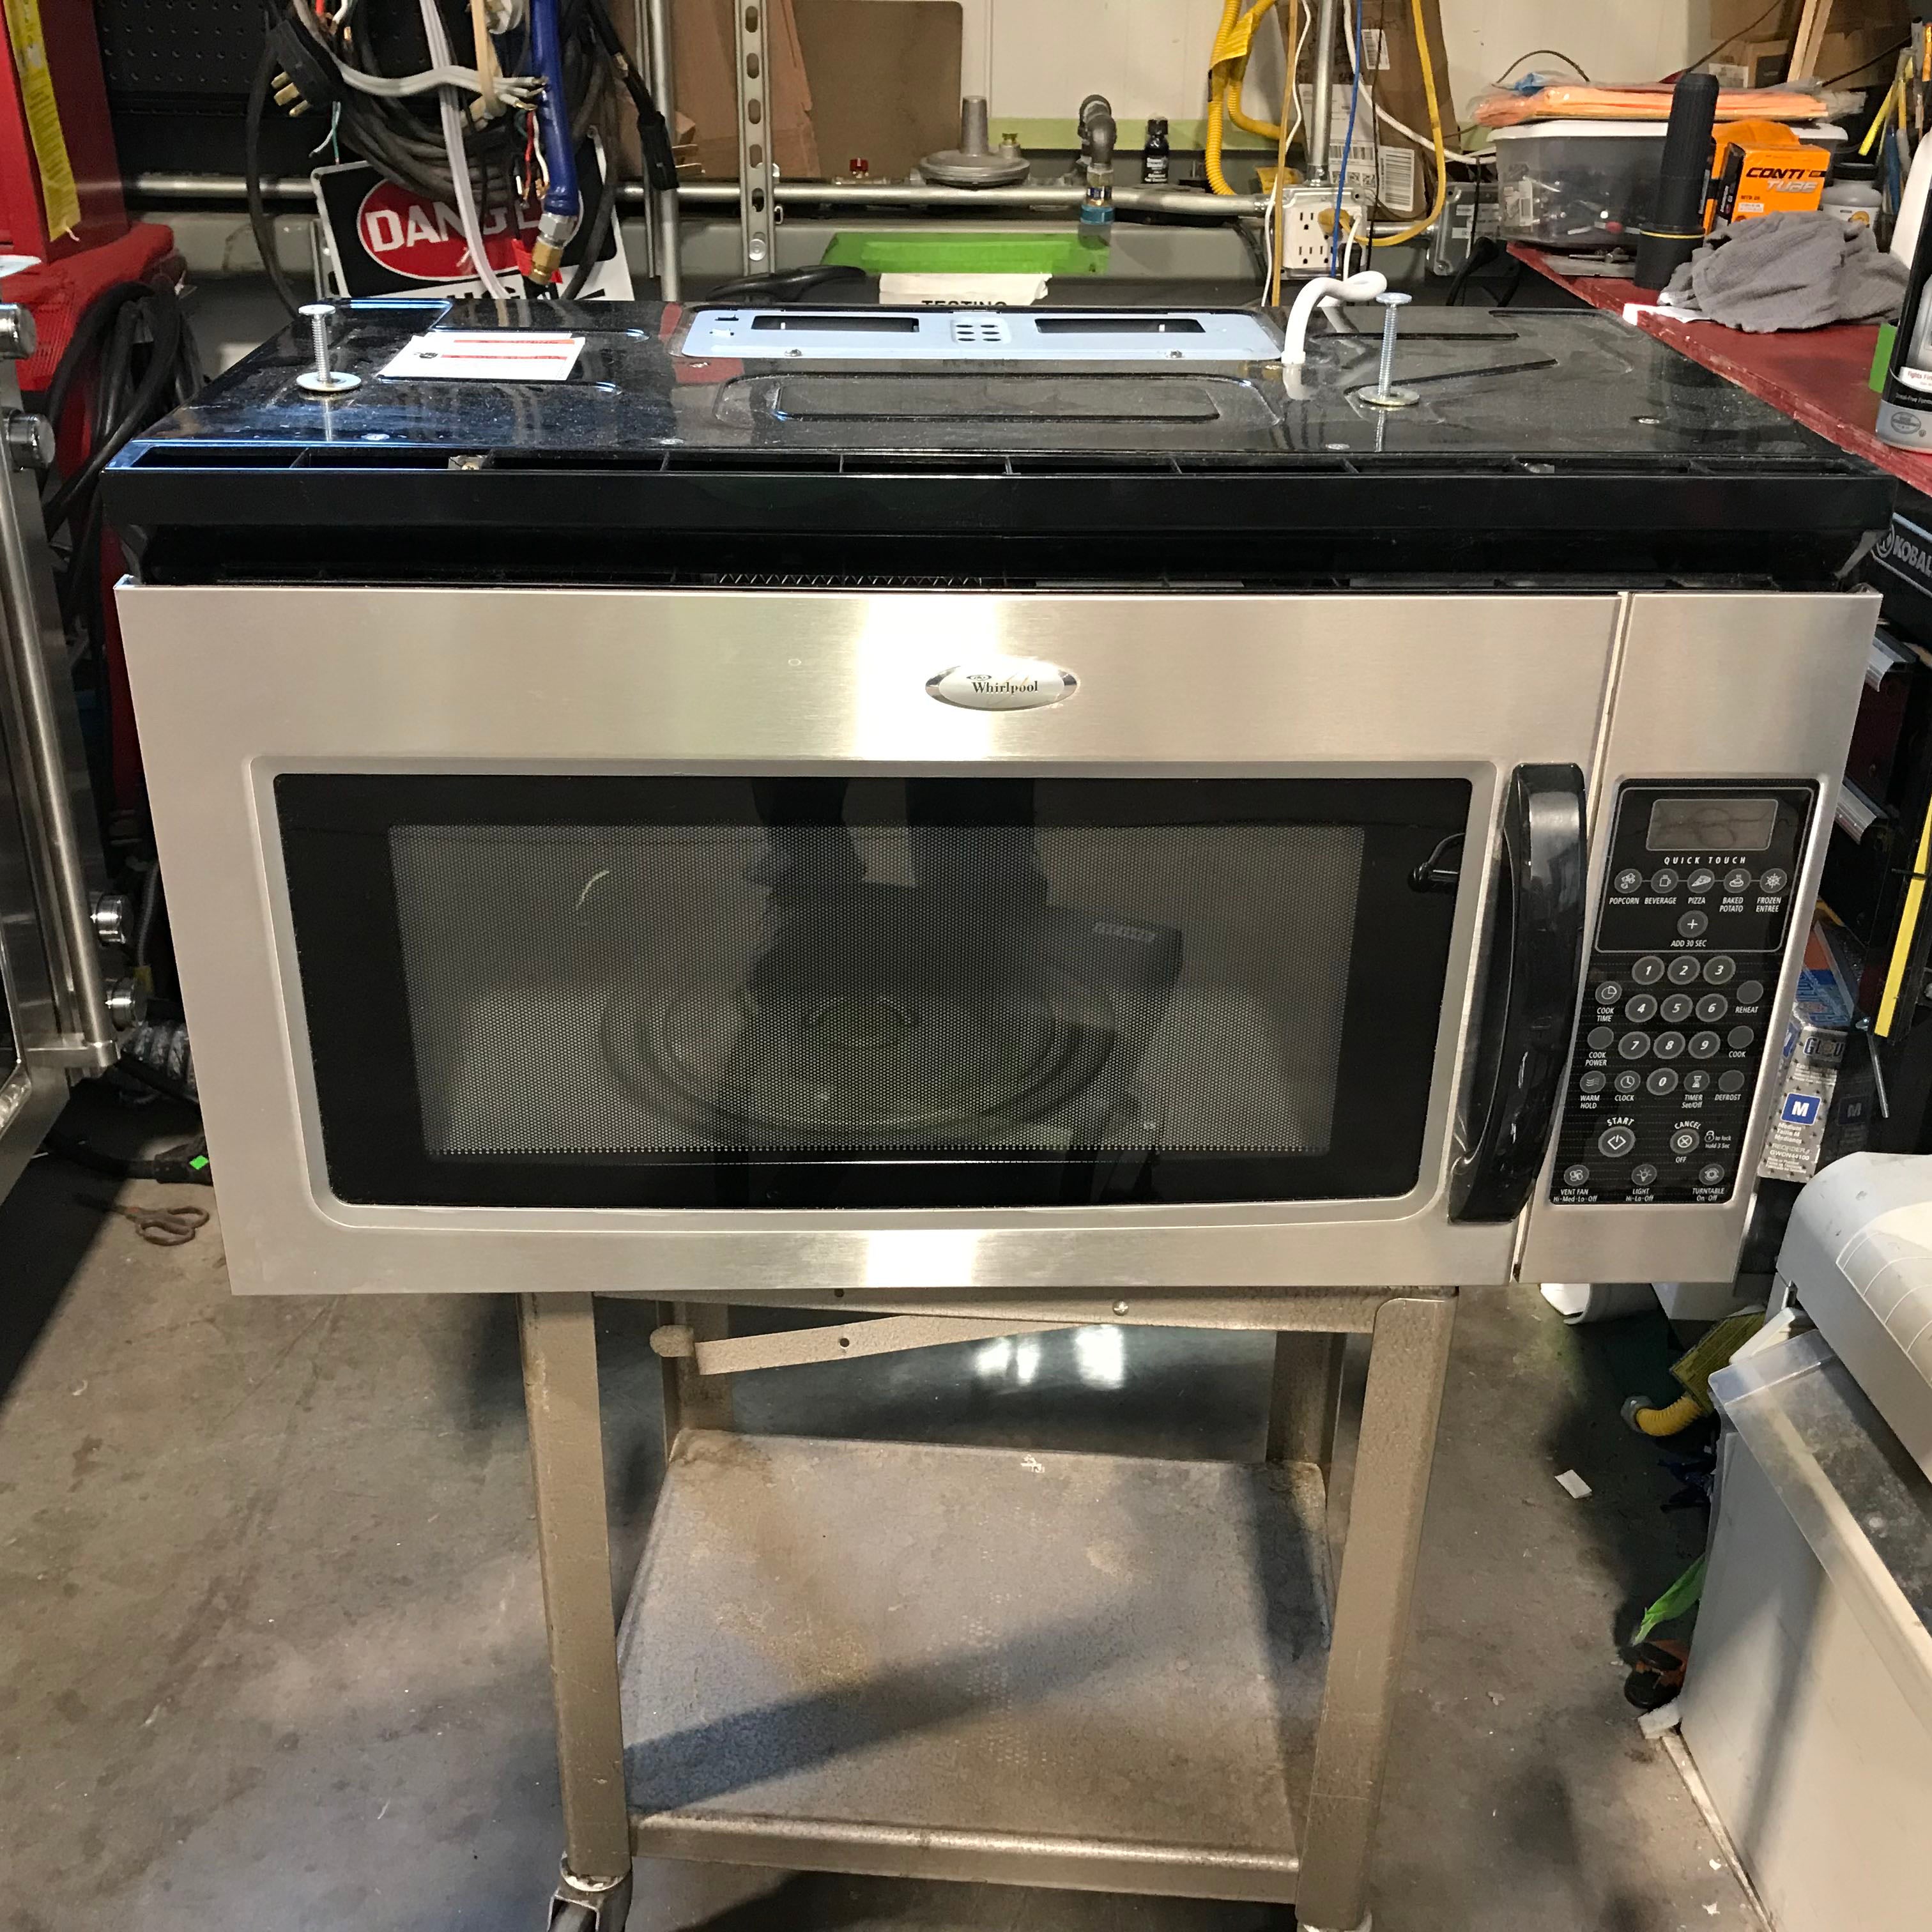 30"x 17"x 17" Whirlpool Stainless Steel Over The Range Microwave